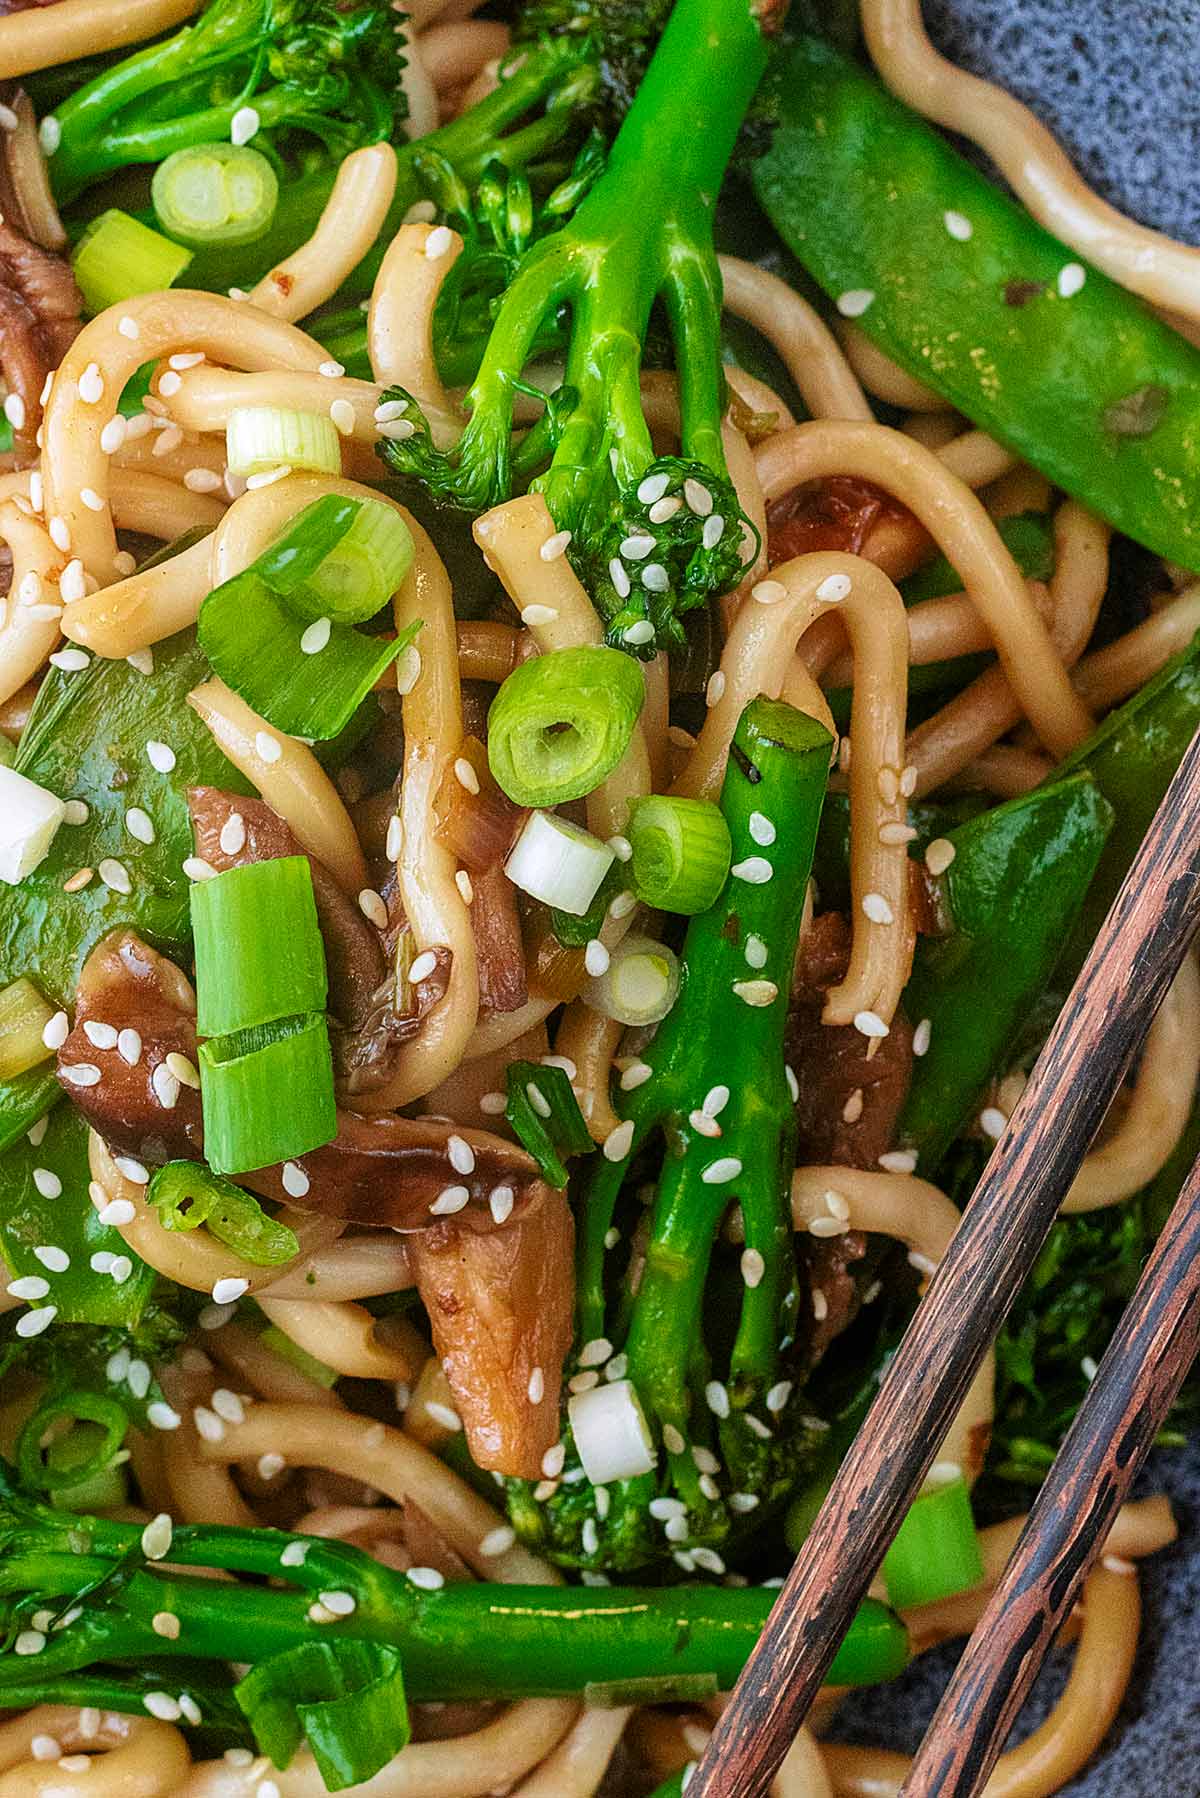 Tenderstem broccoli, spring onions and mangetout mixed into udon noodles.